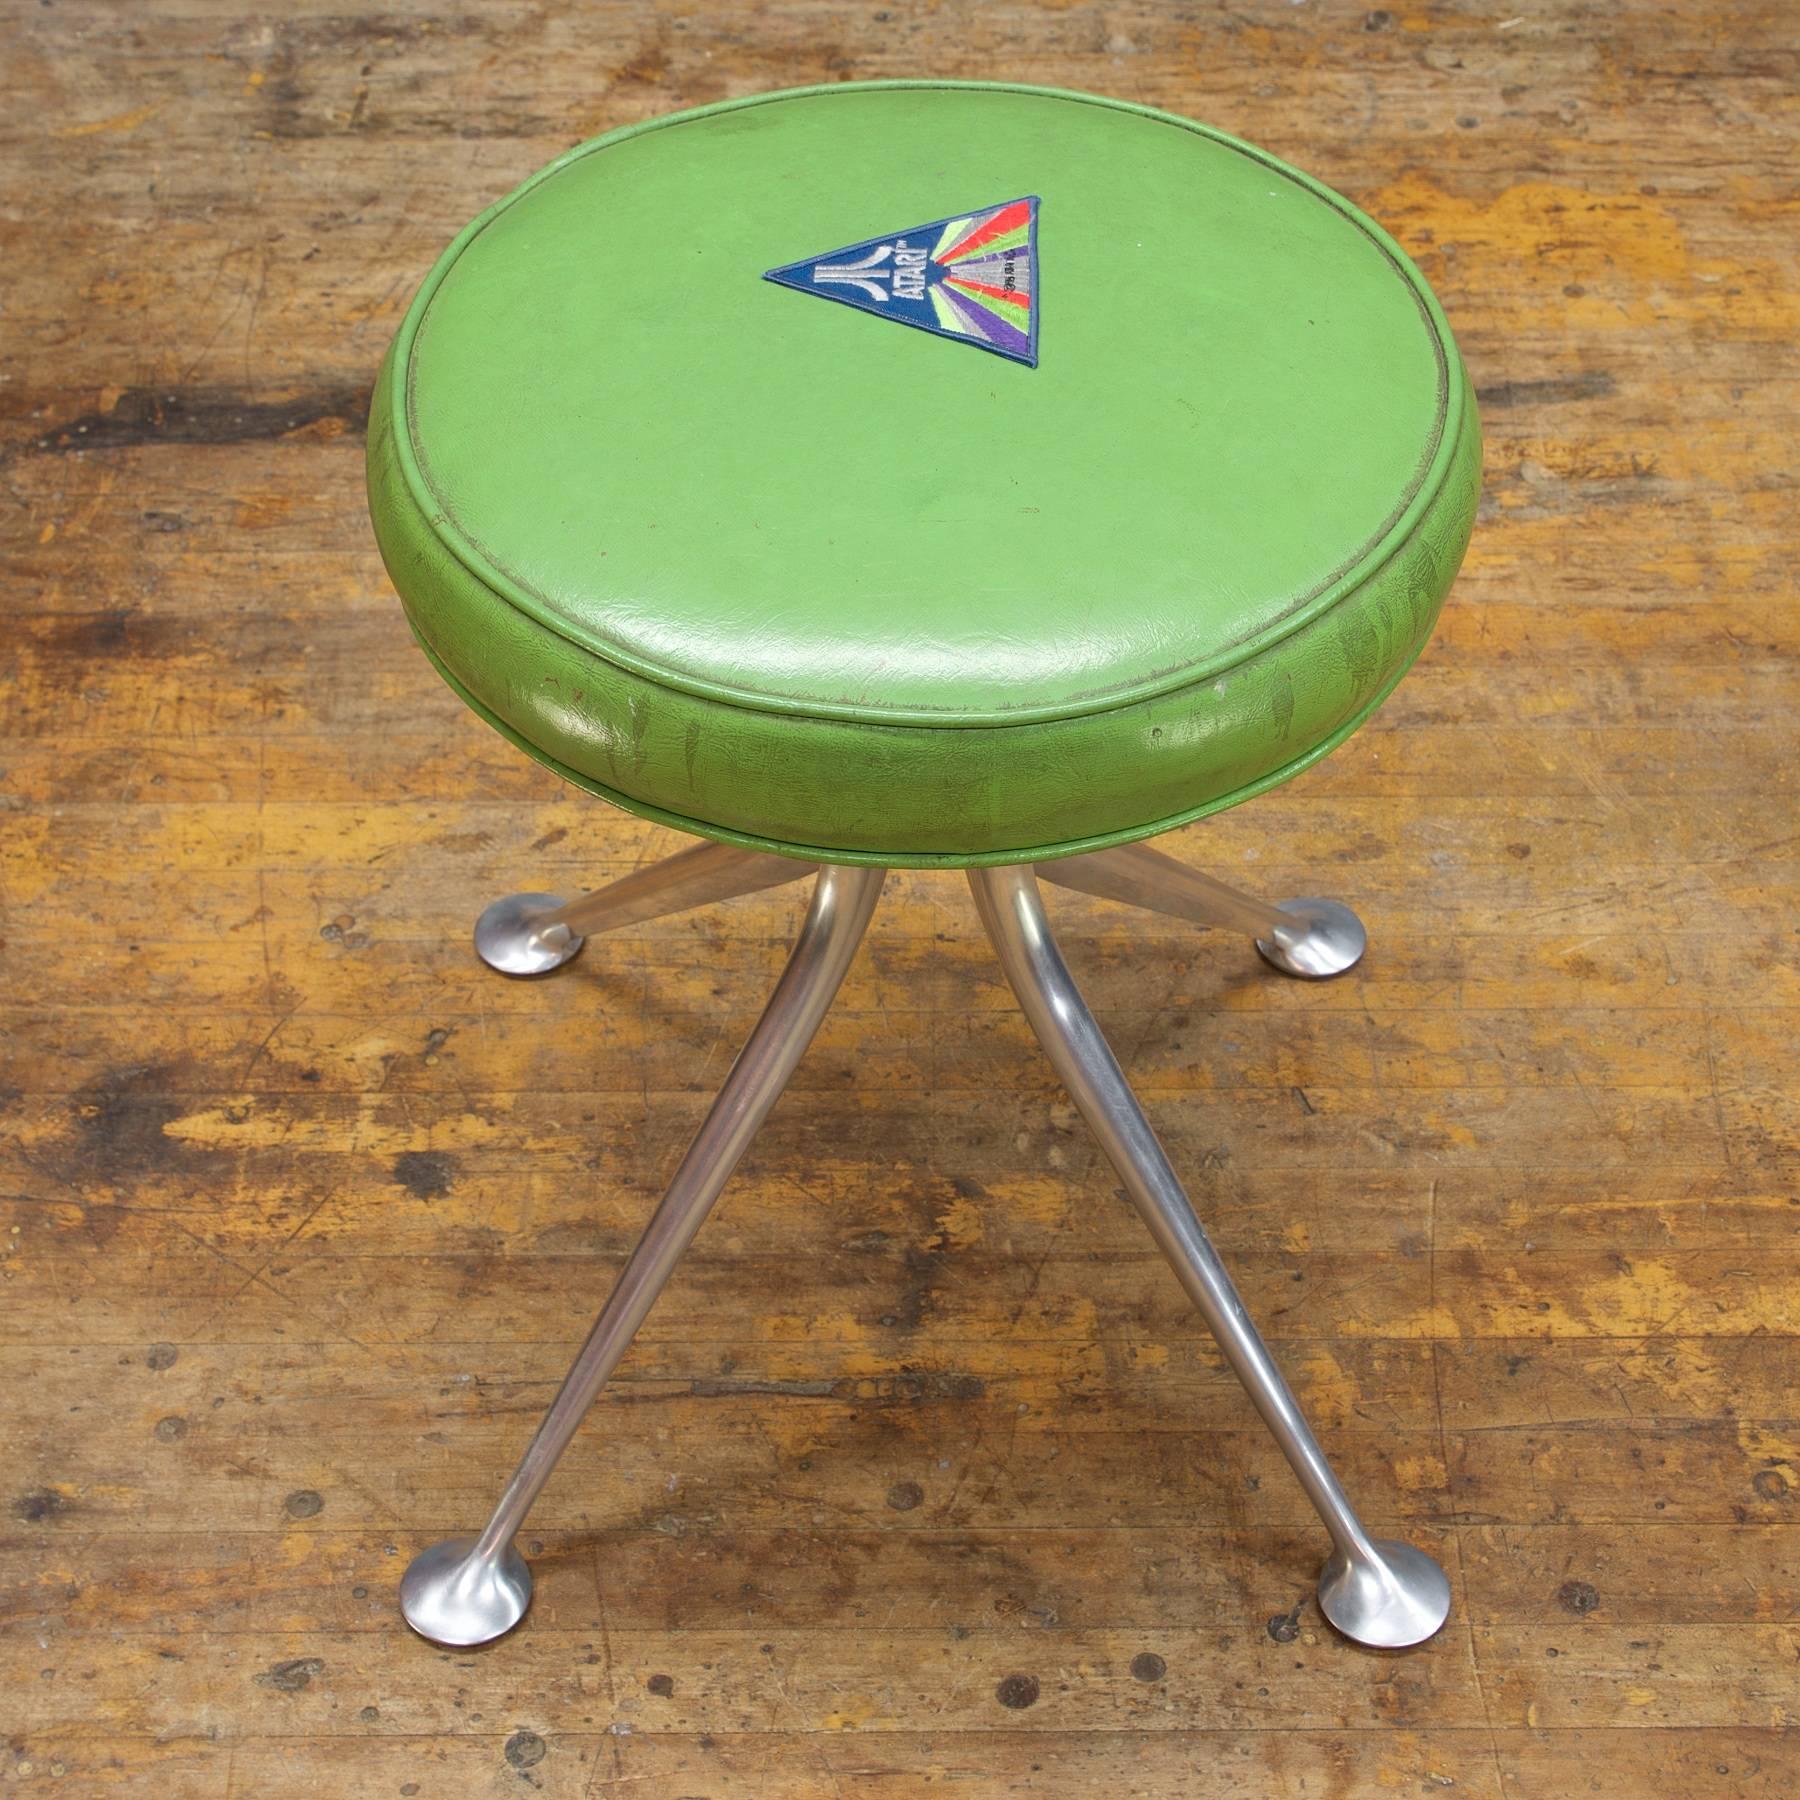 A rare original first run Alexander Girard designed model no.66308 stool, manufactured by Herman Miller, in cast and milled aluminium. The round seat cushion is heavily patinated green vinyl, repaired with a mid-1970s Atari patch.